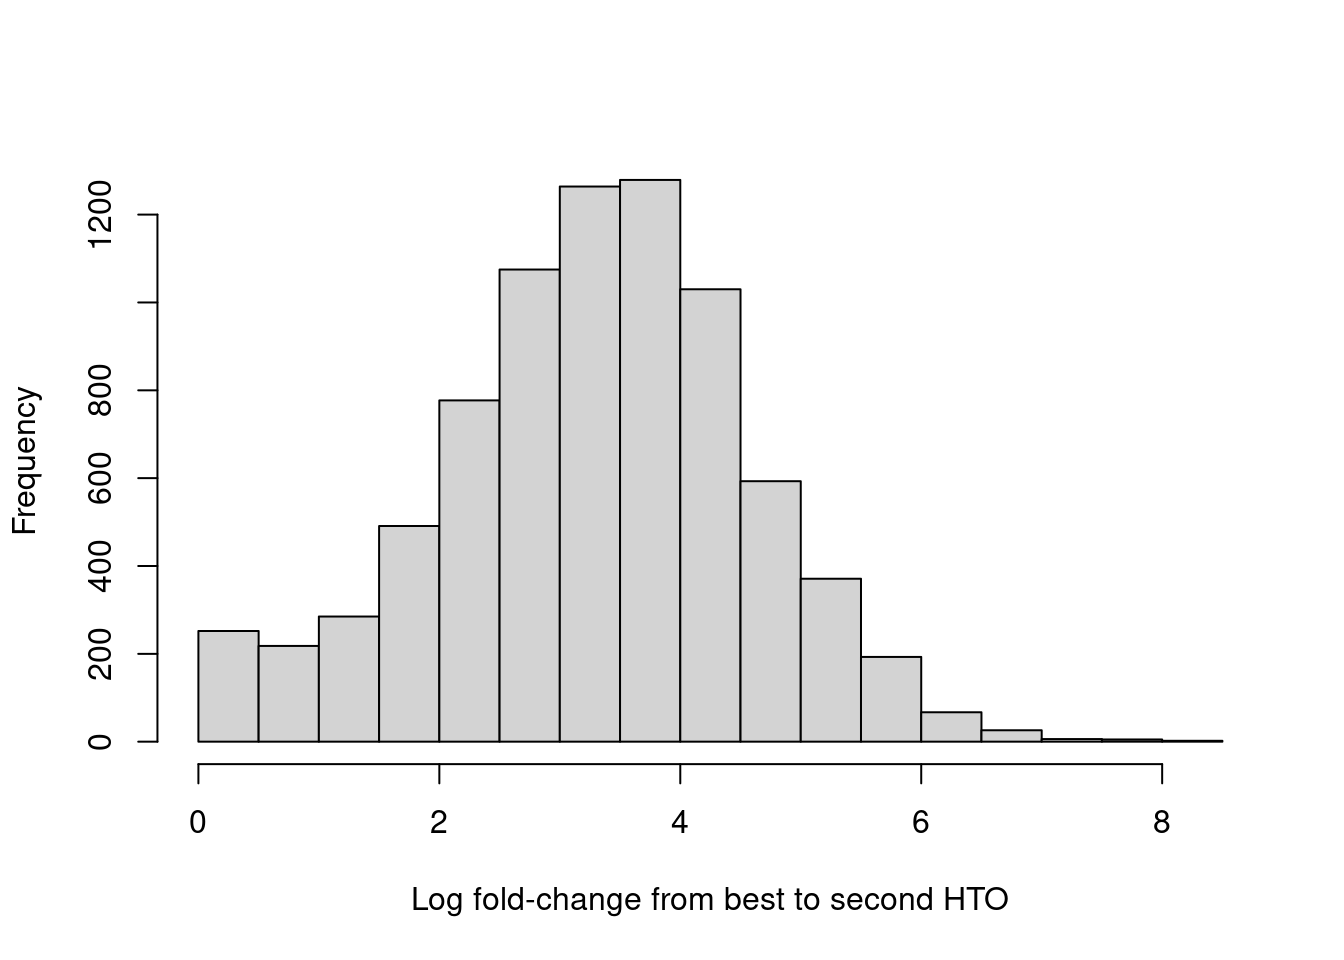 Distribution of log-fold changes from the first to second-most abundant HTO in each cell.